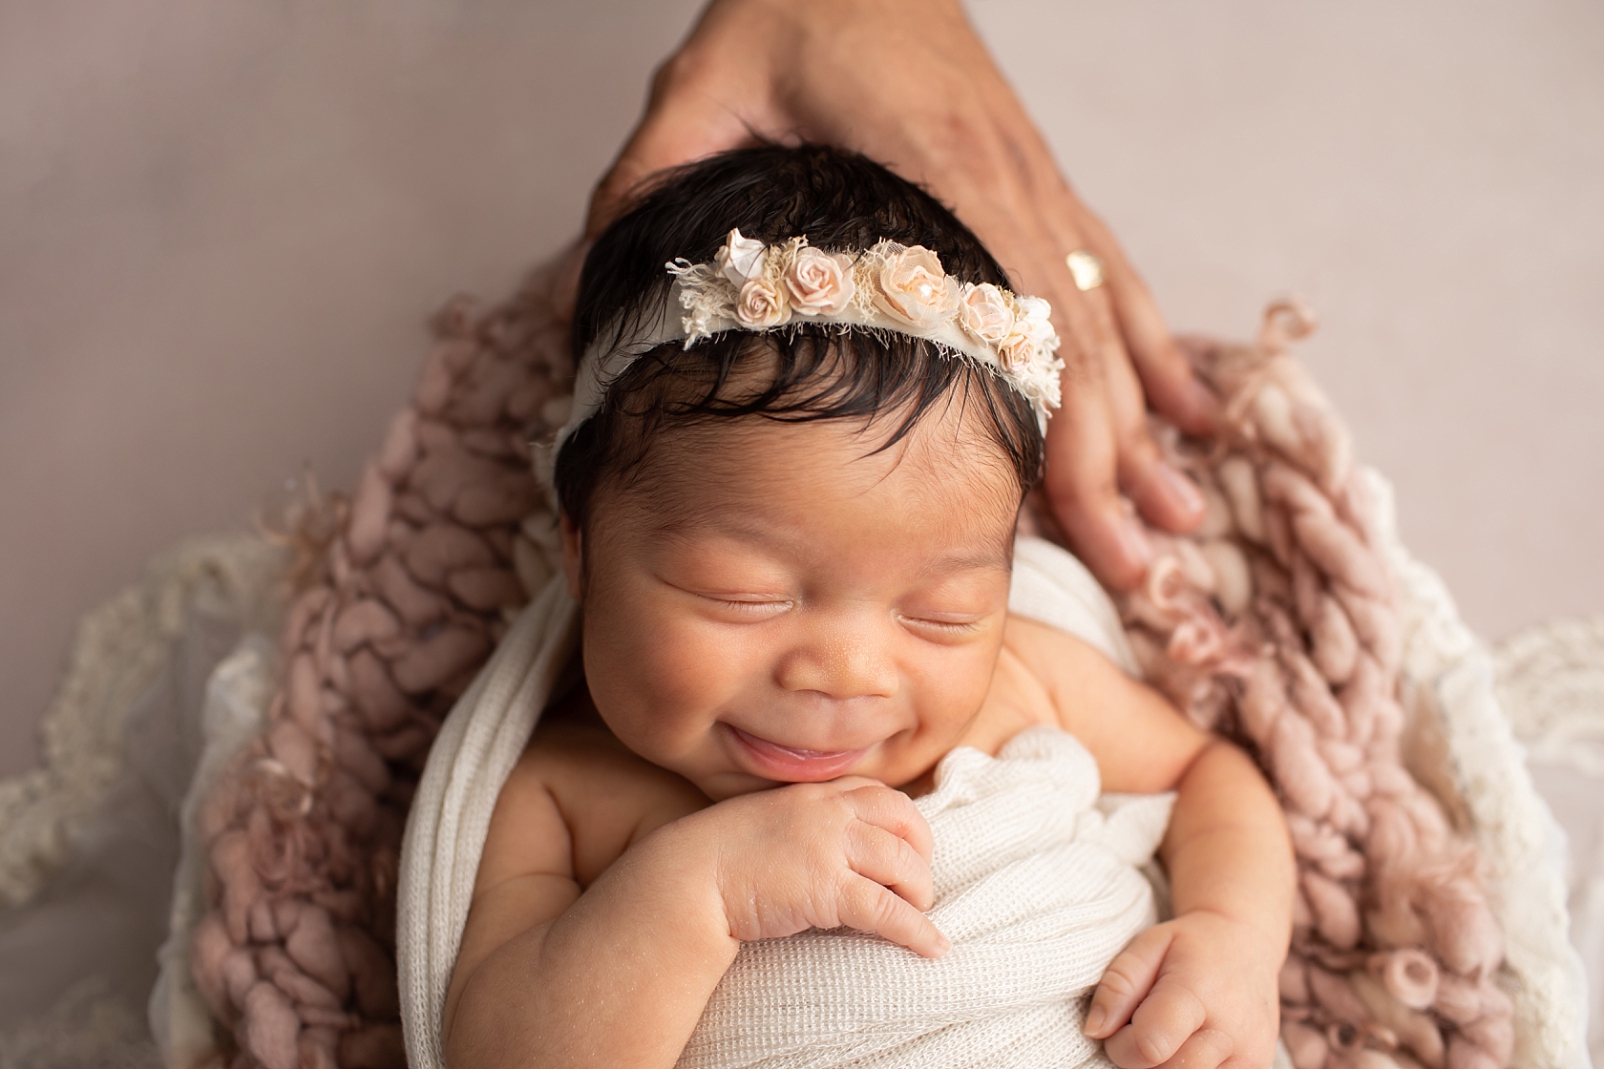 Newborn baby girl smiling with eyes closed